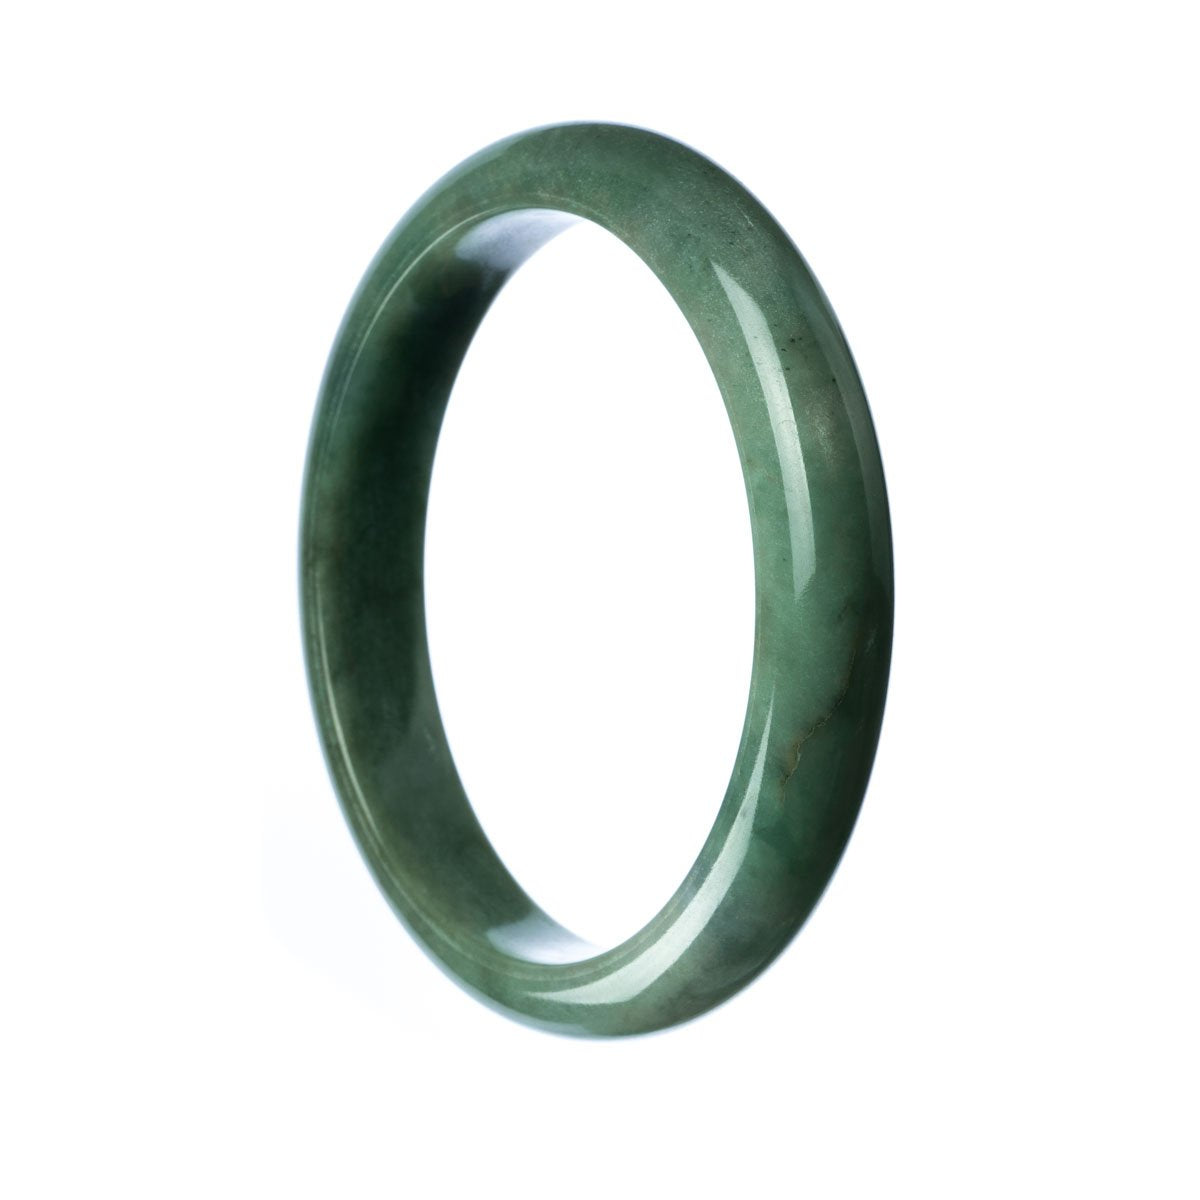 A beautiful green jadeite jade bangle bracelet with a semi-round shape, measuring 78mm in diameter. Perfect for adding a touch of elegance and natural beauty to any outfit.